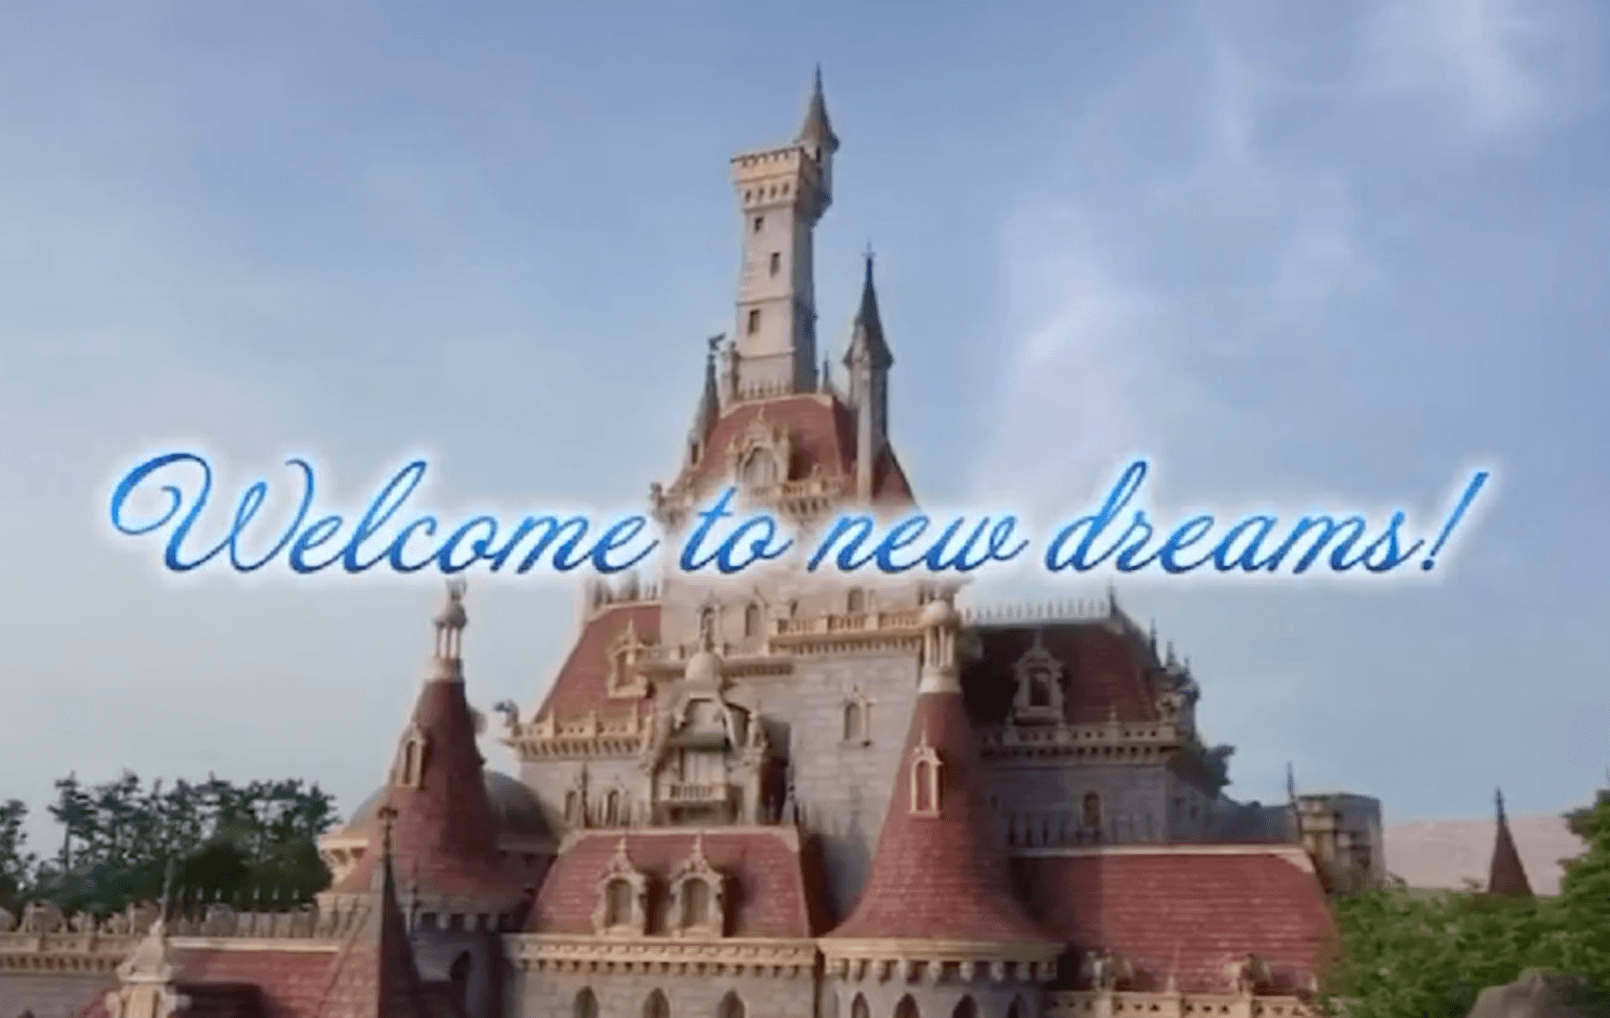 “Welcome to New Dreams” Tokyo Disneyland Releases a Video with Park’s Expansion